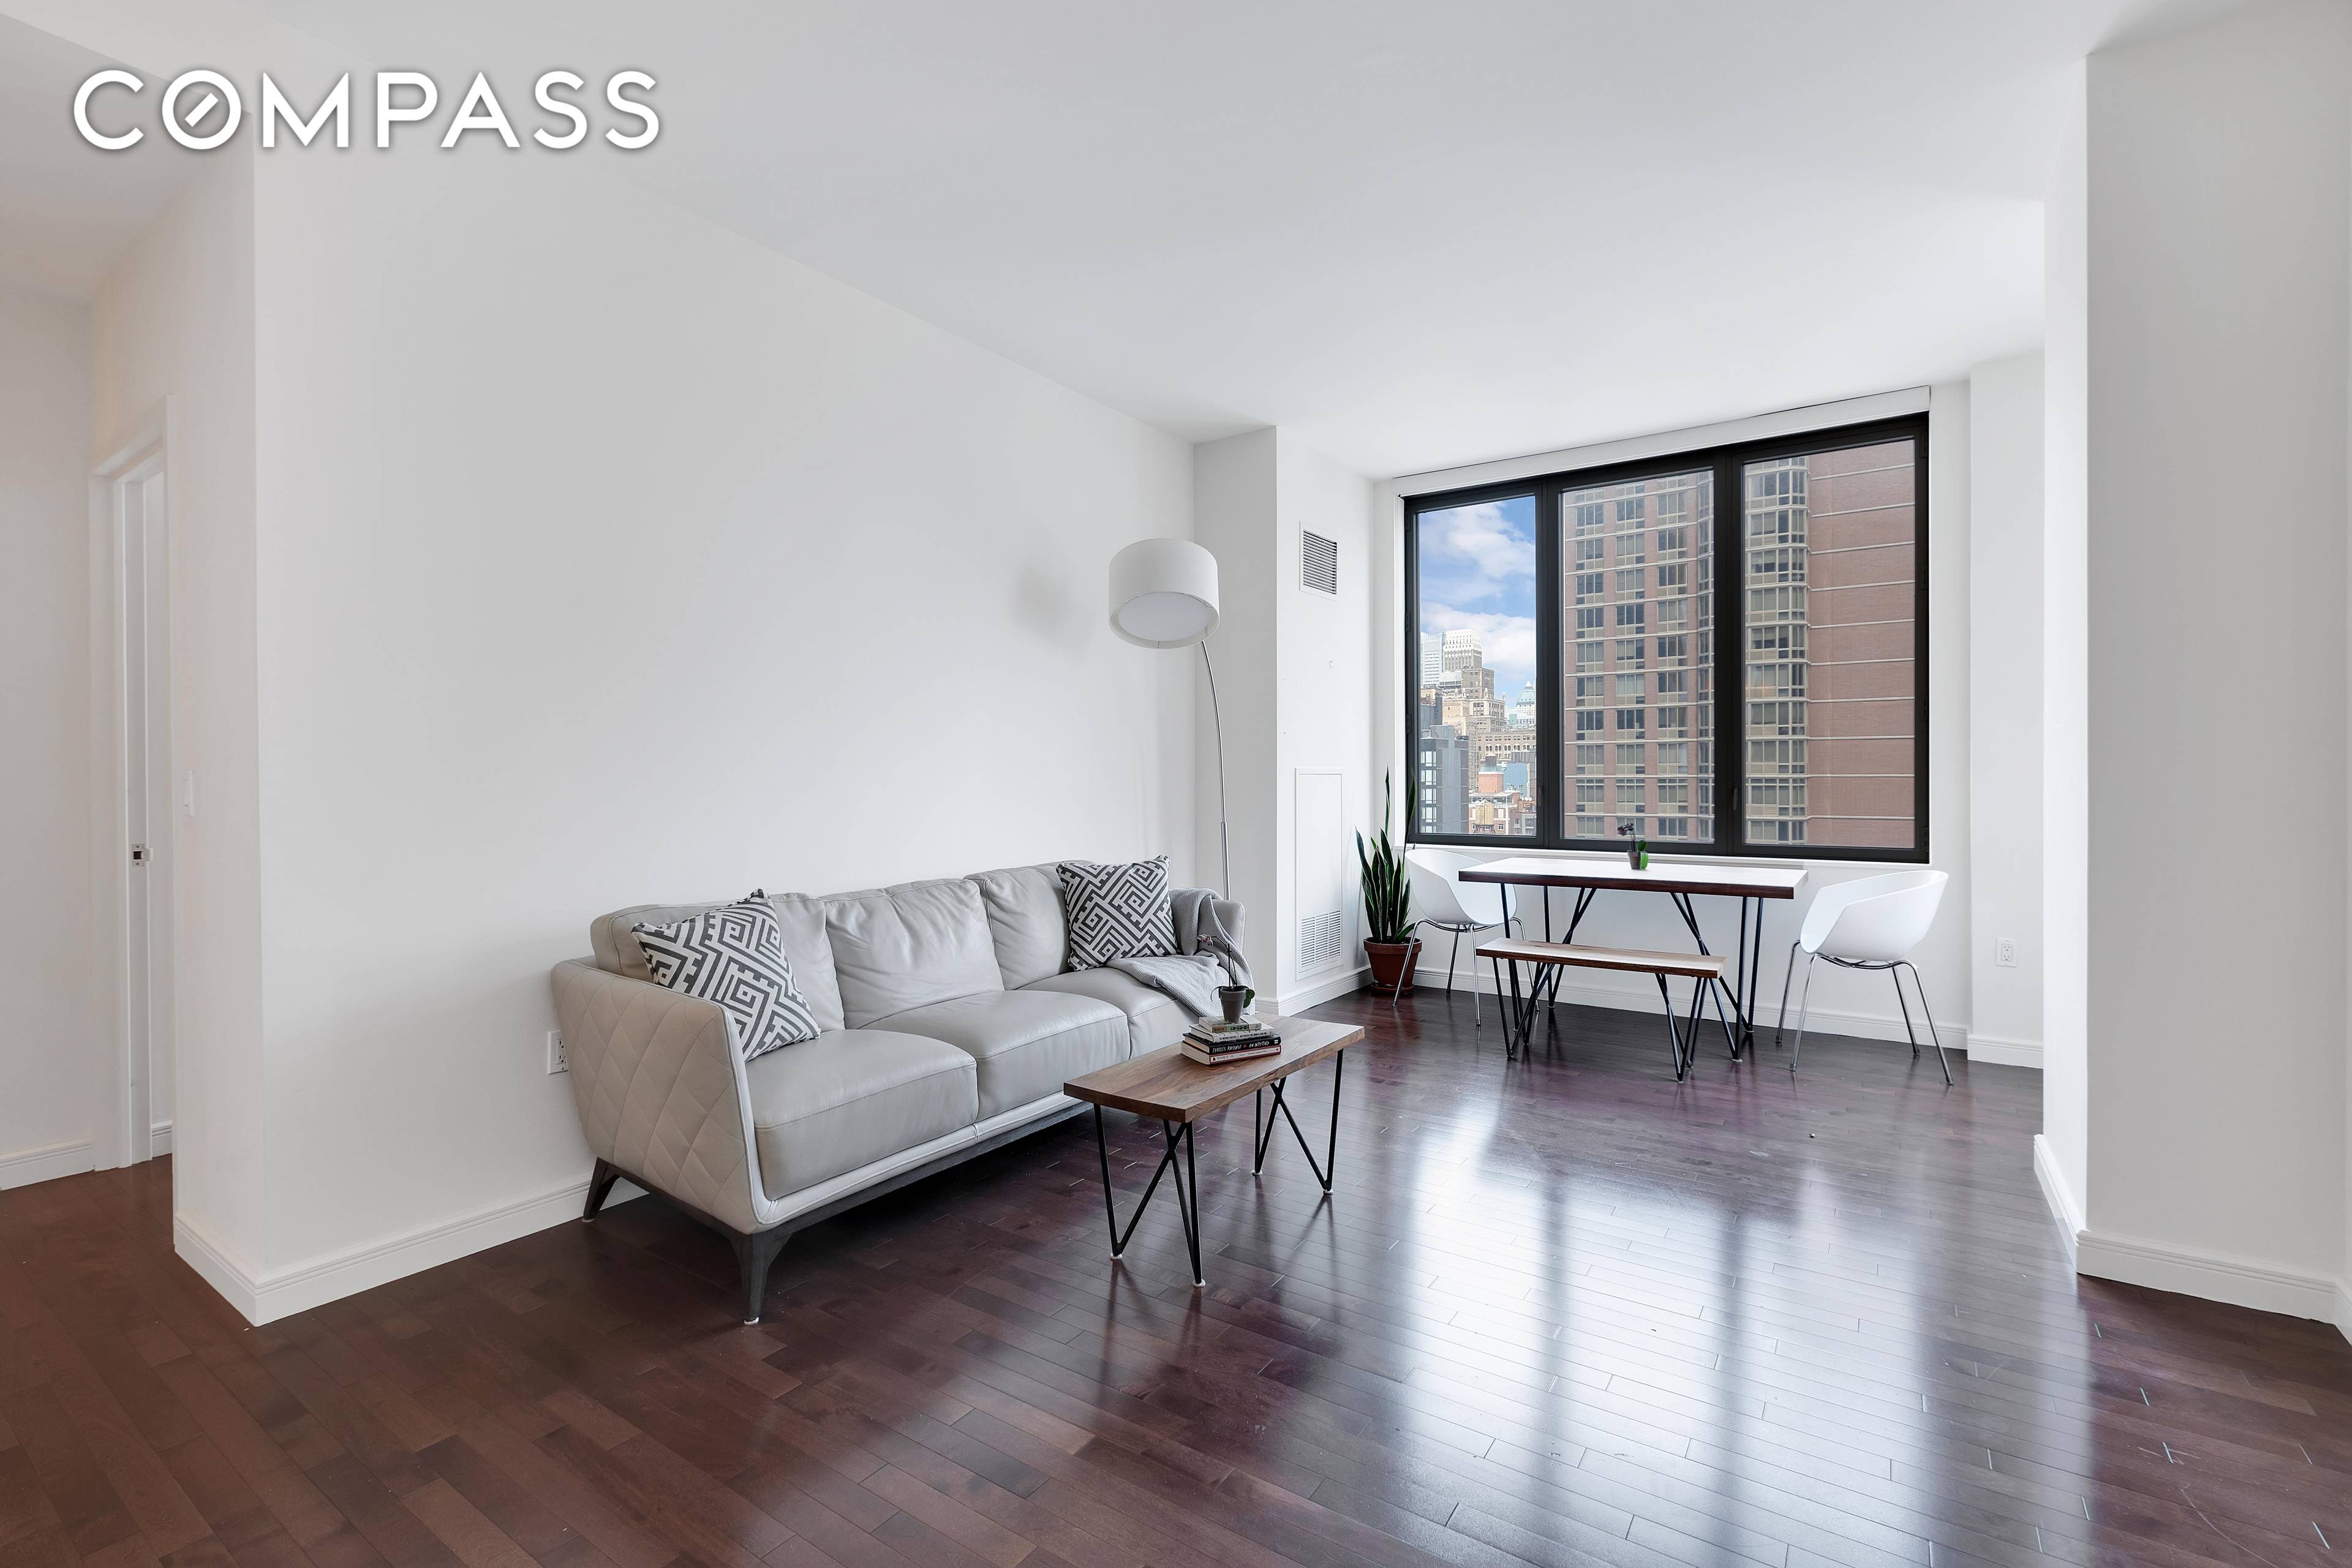 Rarely available, this highly sought after, PARTIALLY FURNISHED, high floor 1 bedroom, 1 bath unit in the luxurious Chelsea Stratus condominium is now available.